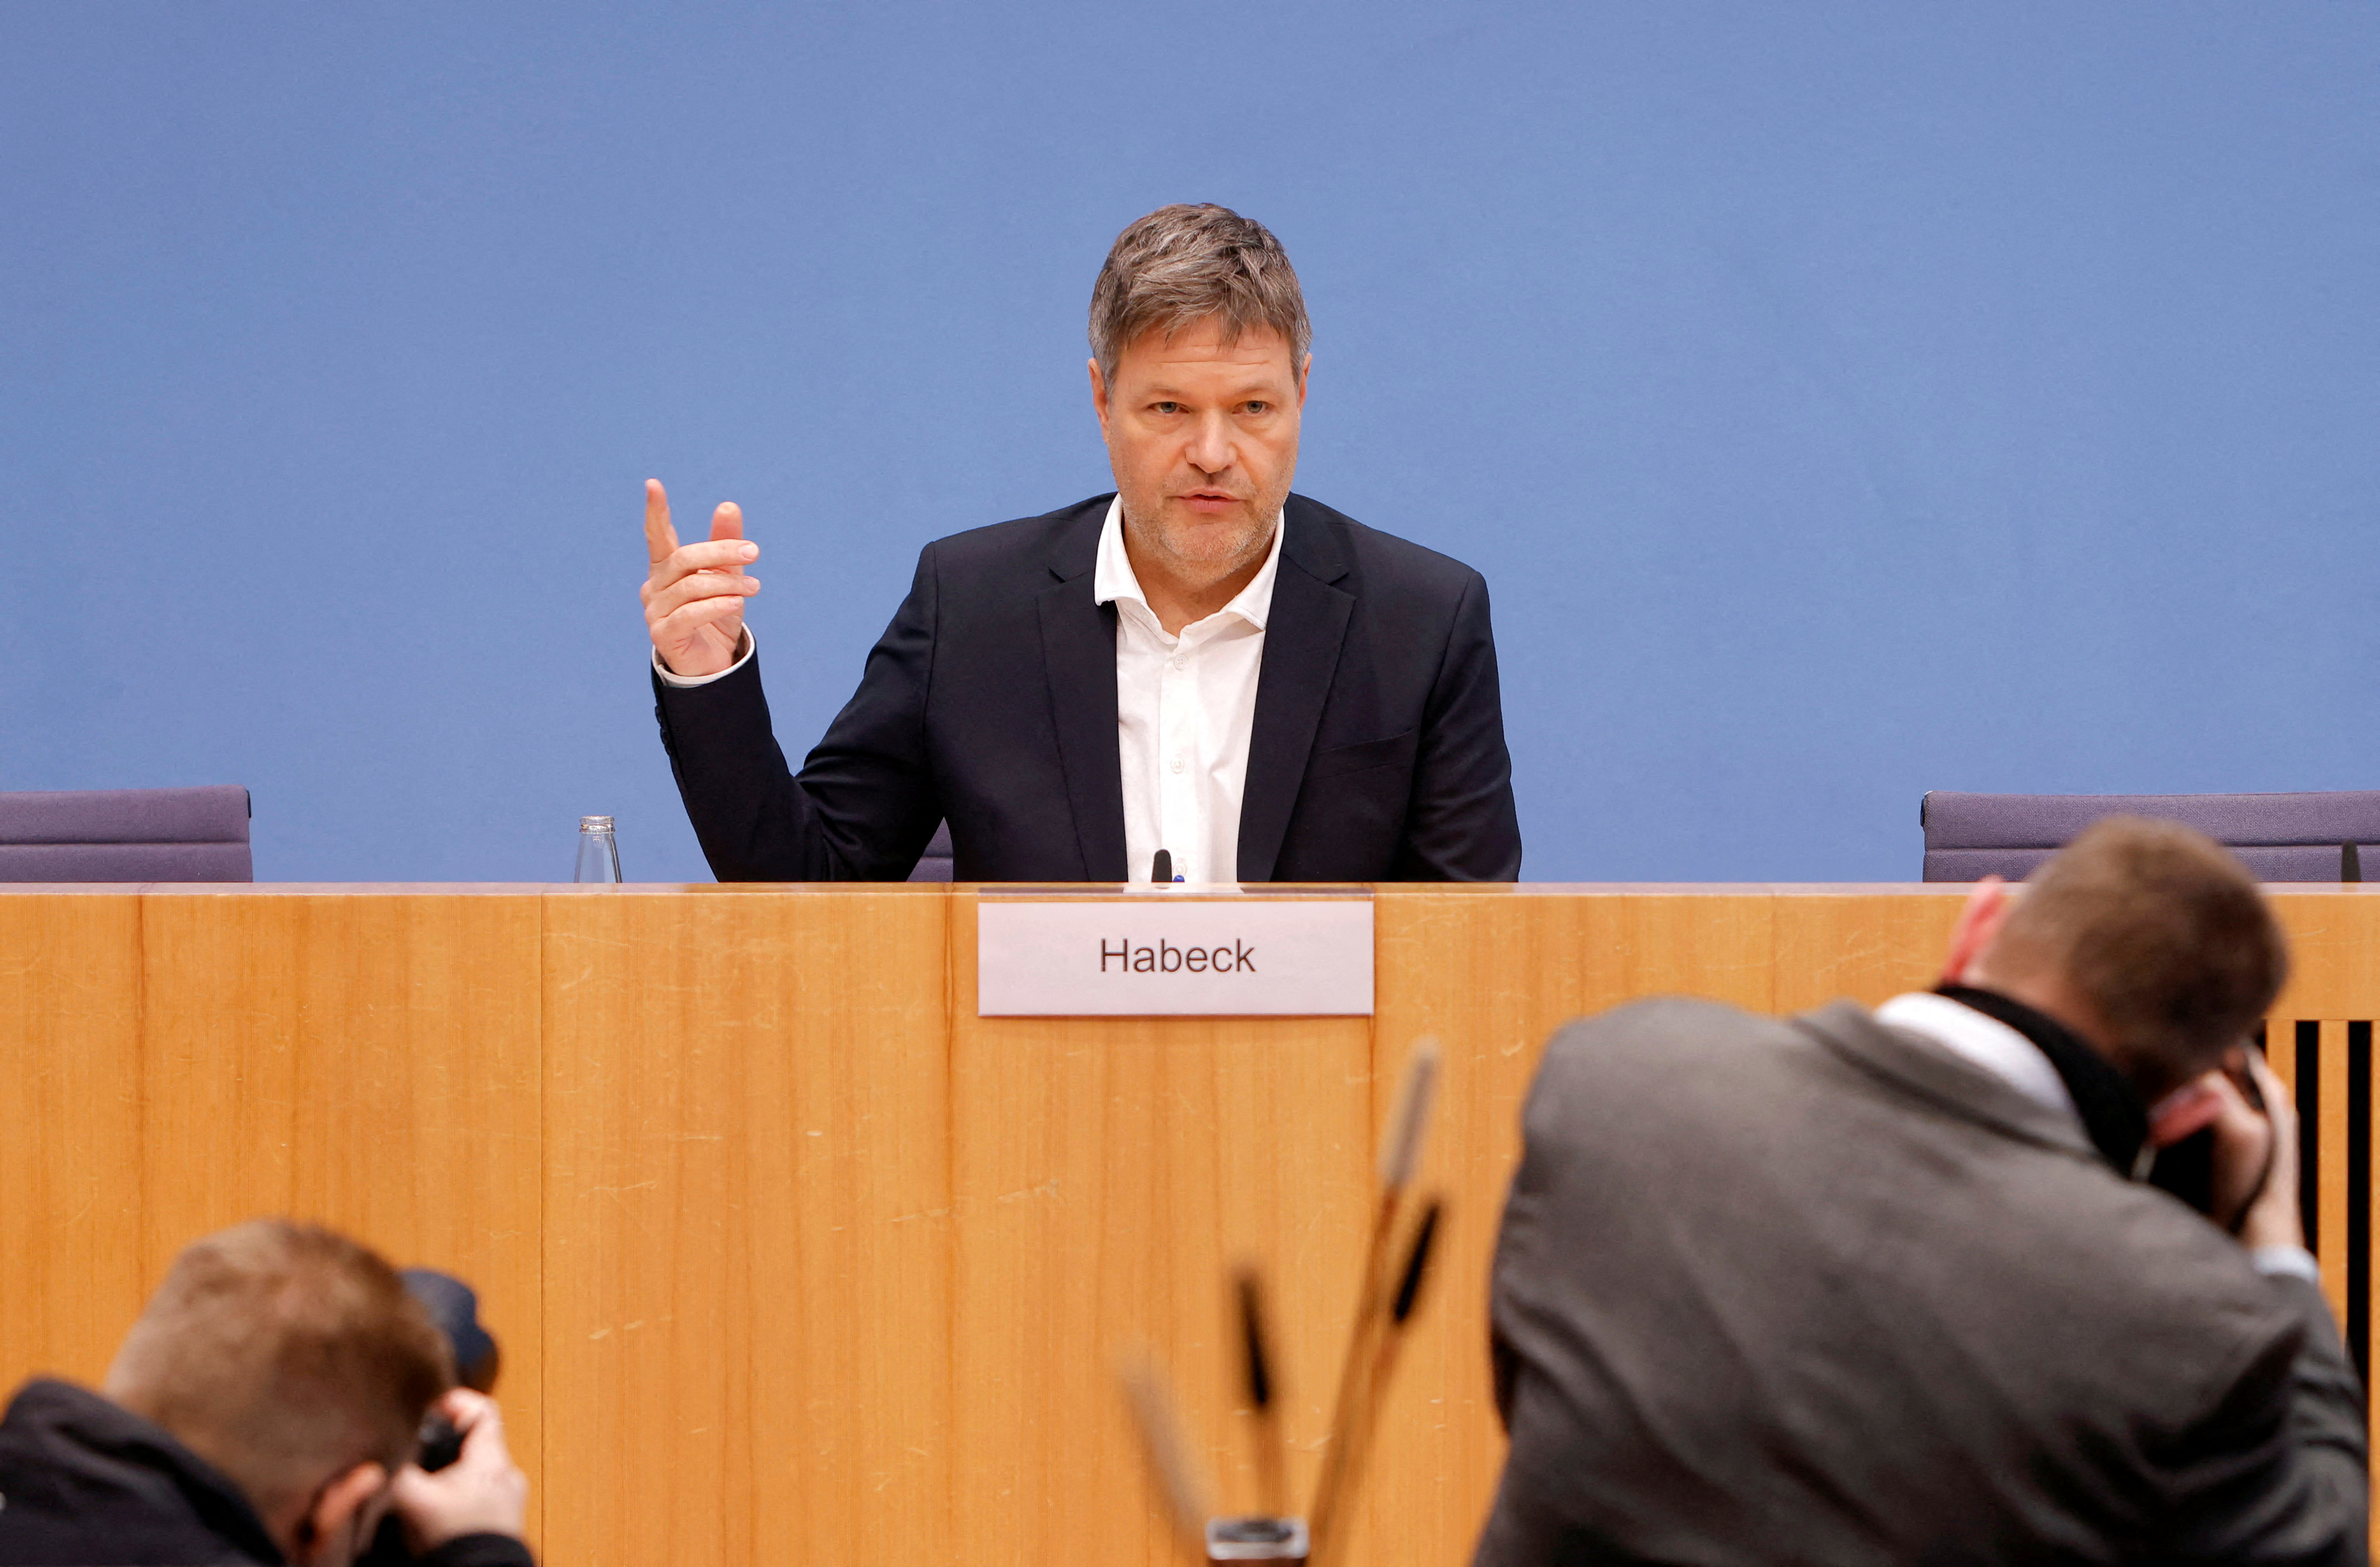 German Economy and Climate Protection Minister Robert Habeck gestures during a news conference in Berlin, Germany, January 11, 2022.  REUTERS/Michele Tantussi